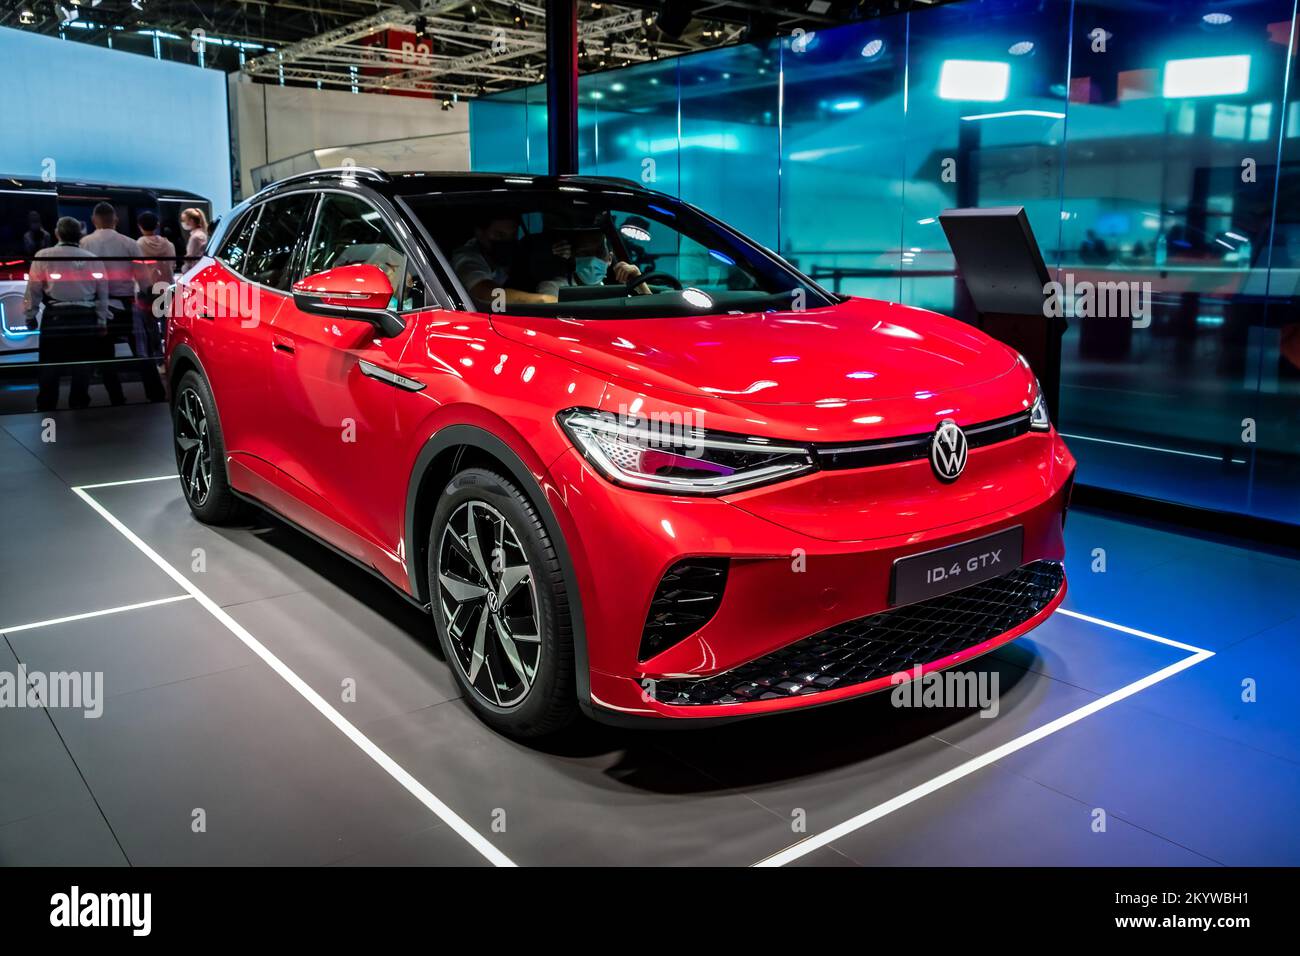 Volkswagen ID.4 GTX all-electric SUV-coupe car showcased at the IAA Mobility 2021 motor show in Munich, Germany - September 6, 2021. Stock Photo